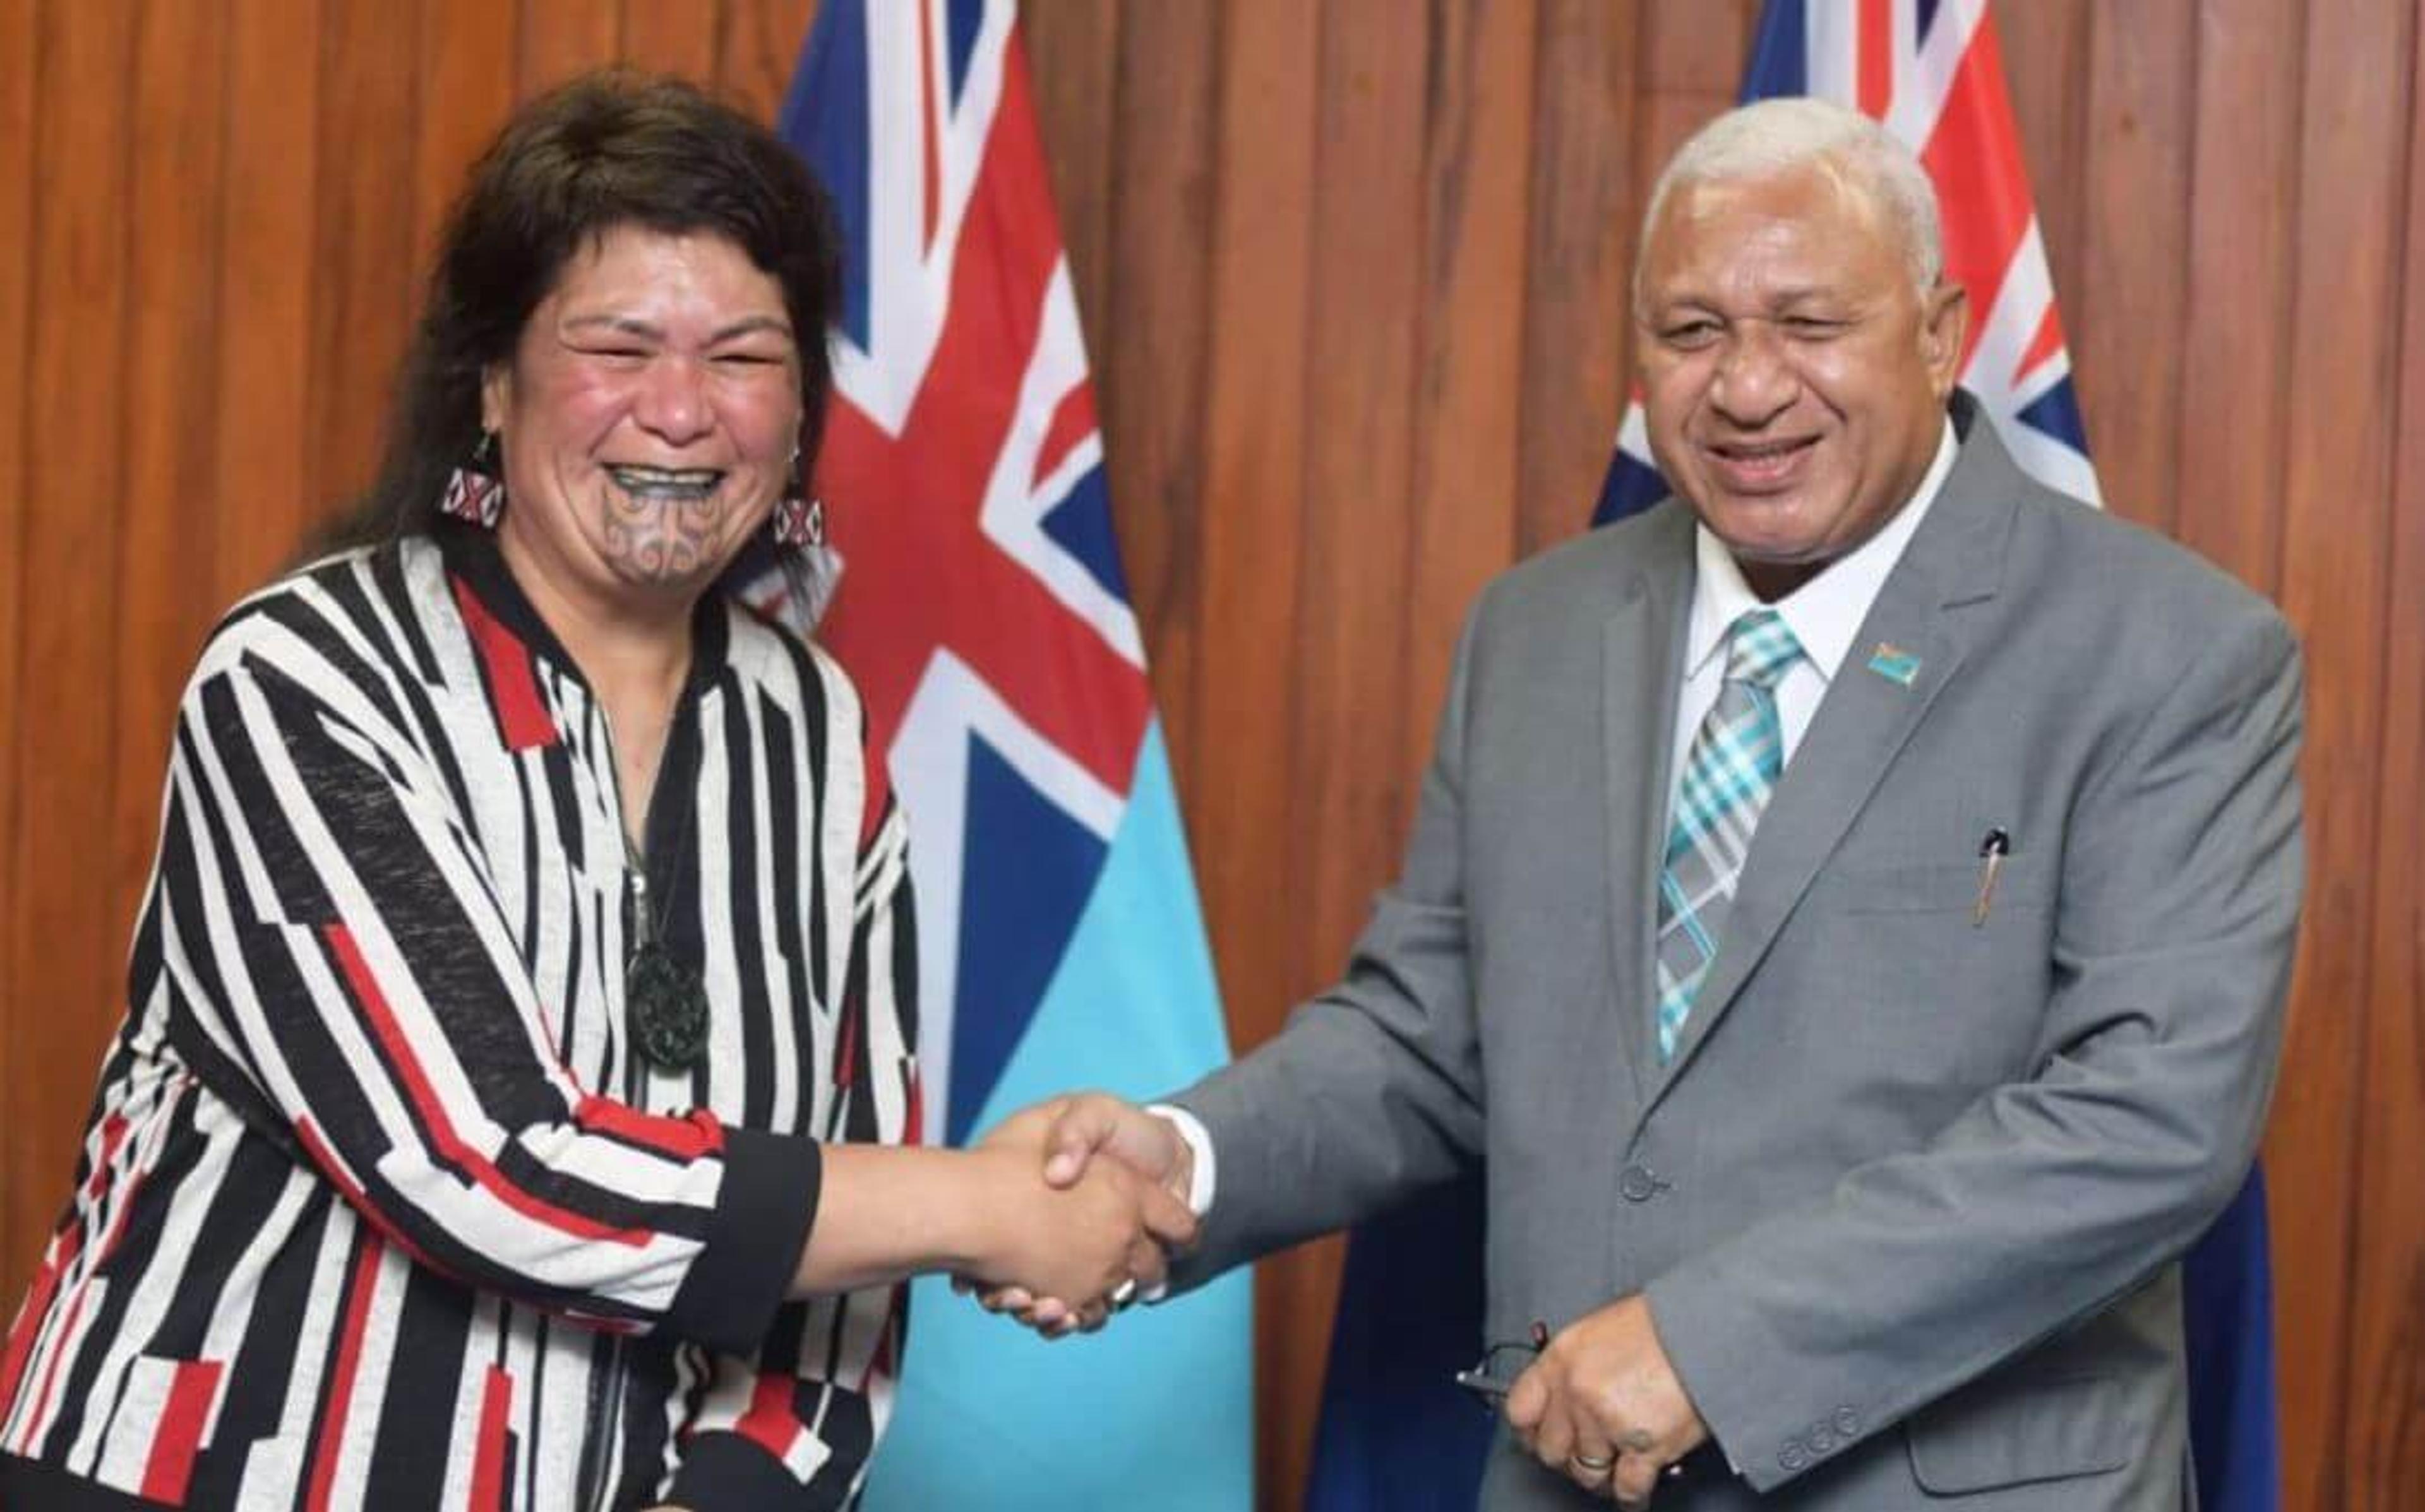 Foreign Affairs Minister Nanaia Mahuta plans to travel to the Pacific in the coming weeks, says relationship is 'strong'. Photo / NZ High Commission Fiji